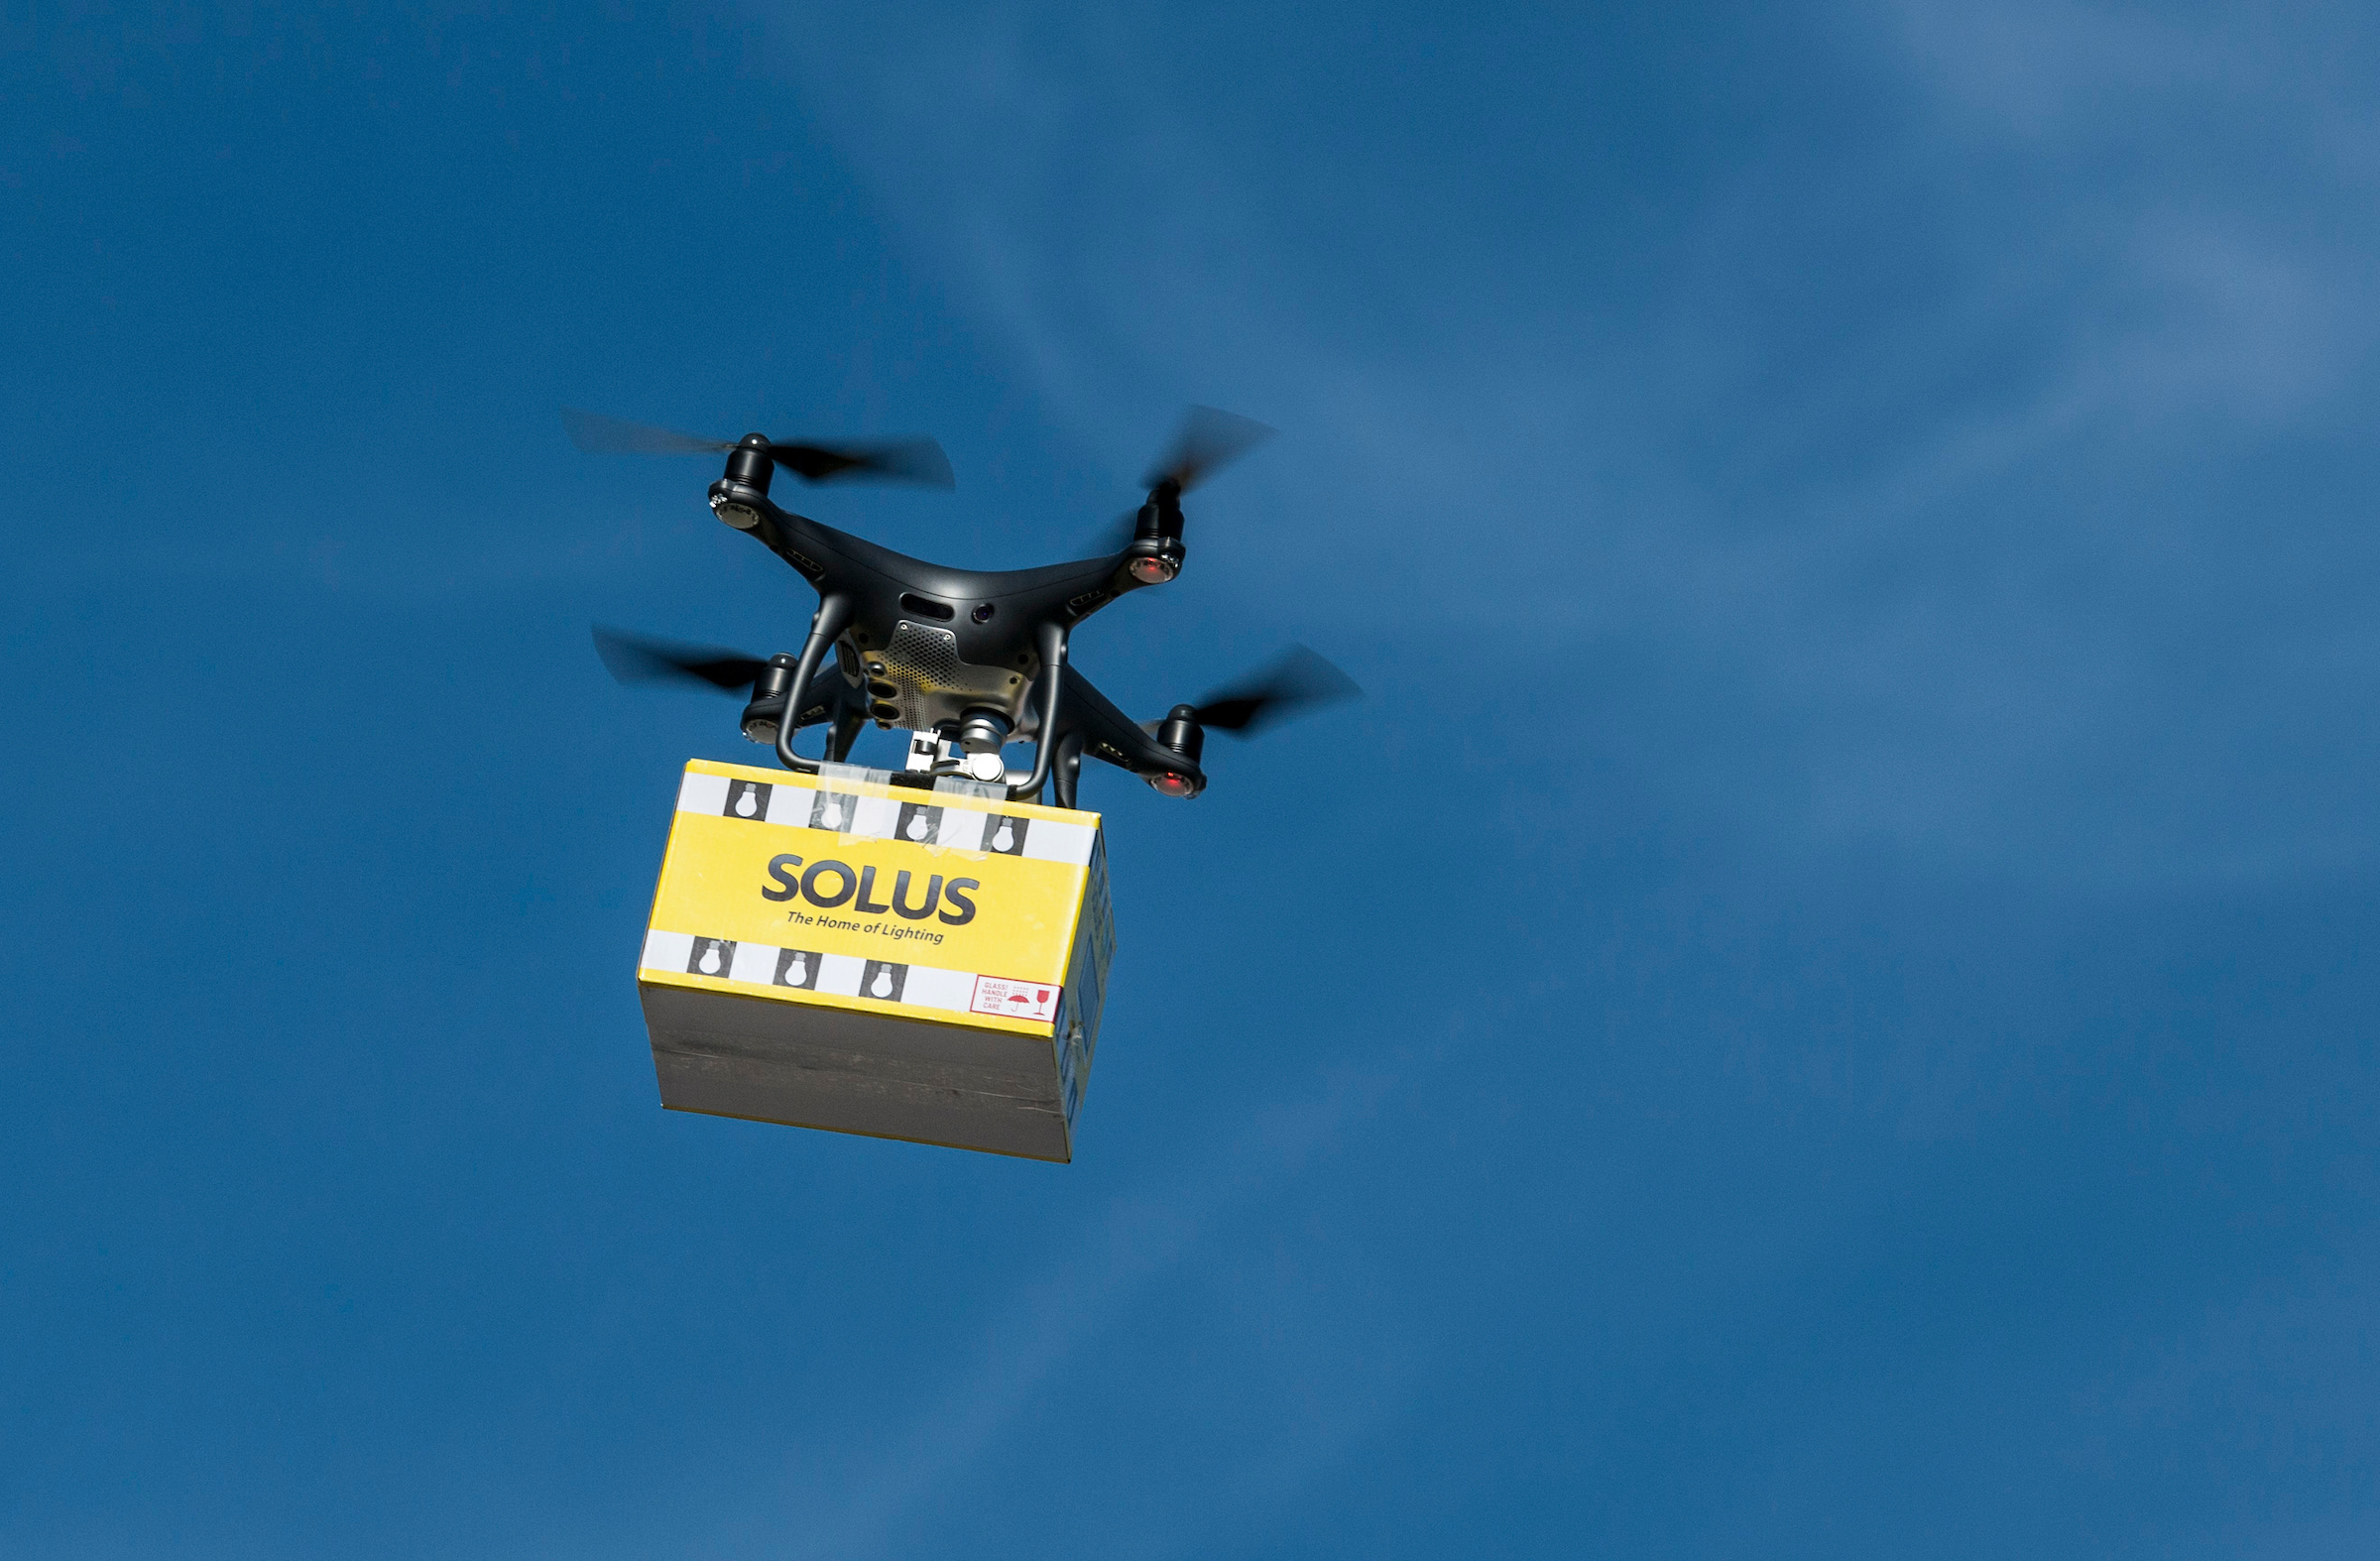 Sky is the Limit for Solus as They Pilot Ireland’s First Retail Drone Delivery